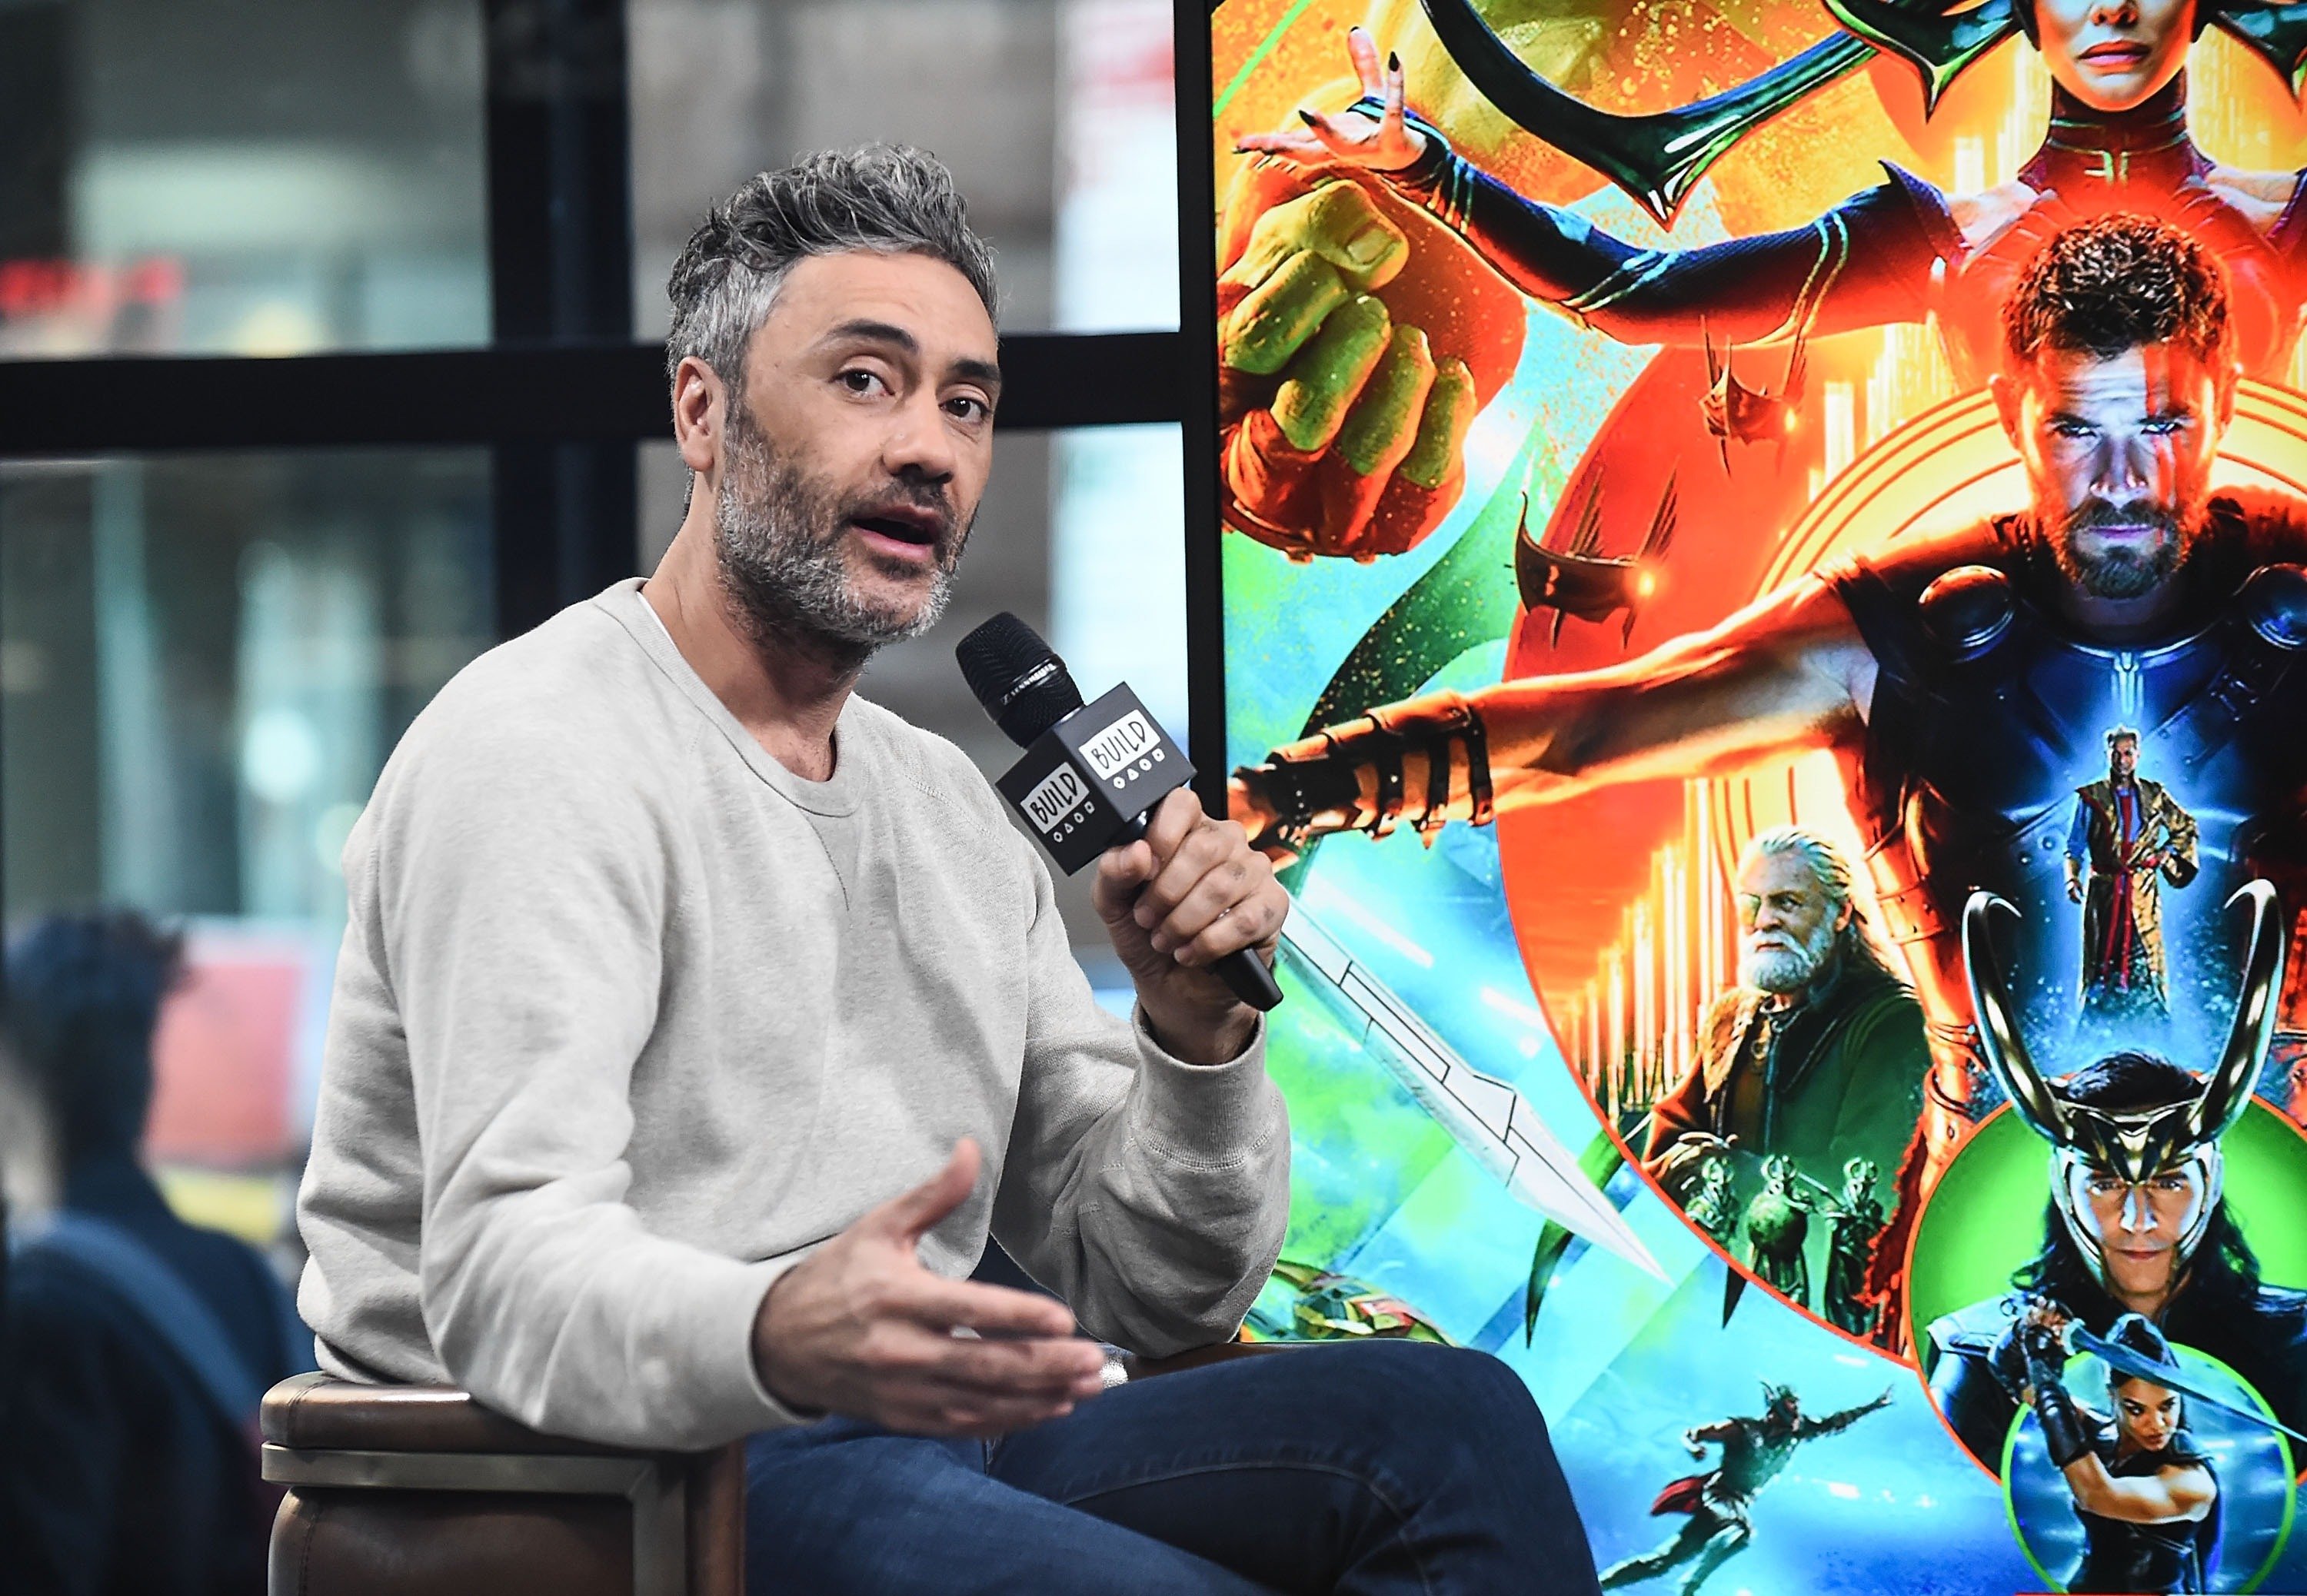 Taika Waititi attends the Build Series in New York City to discuss Thor: Ragnarok